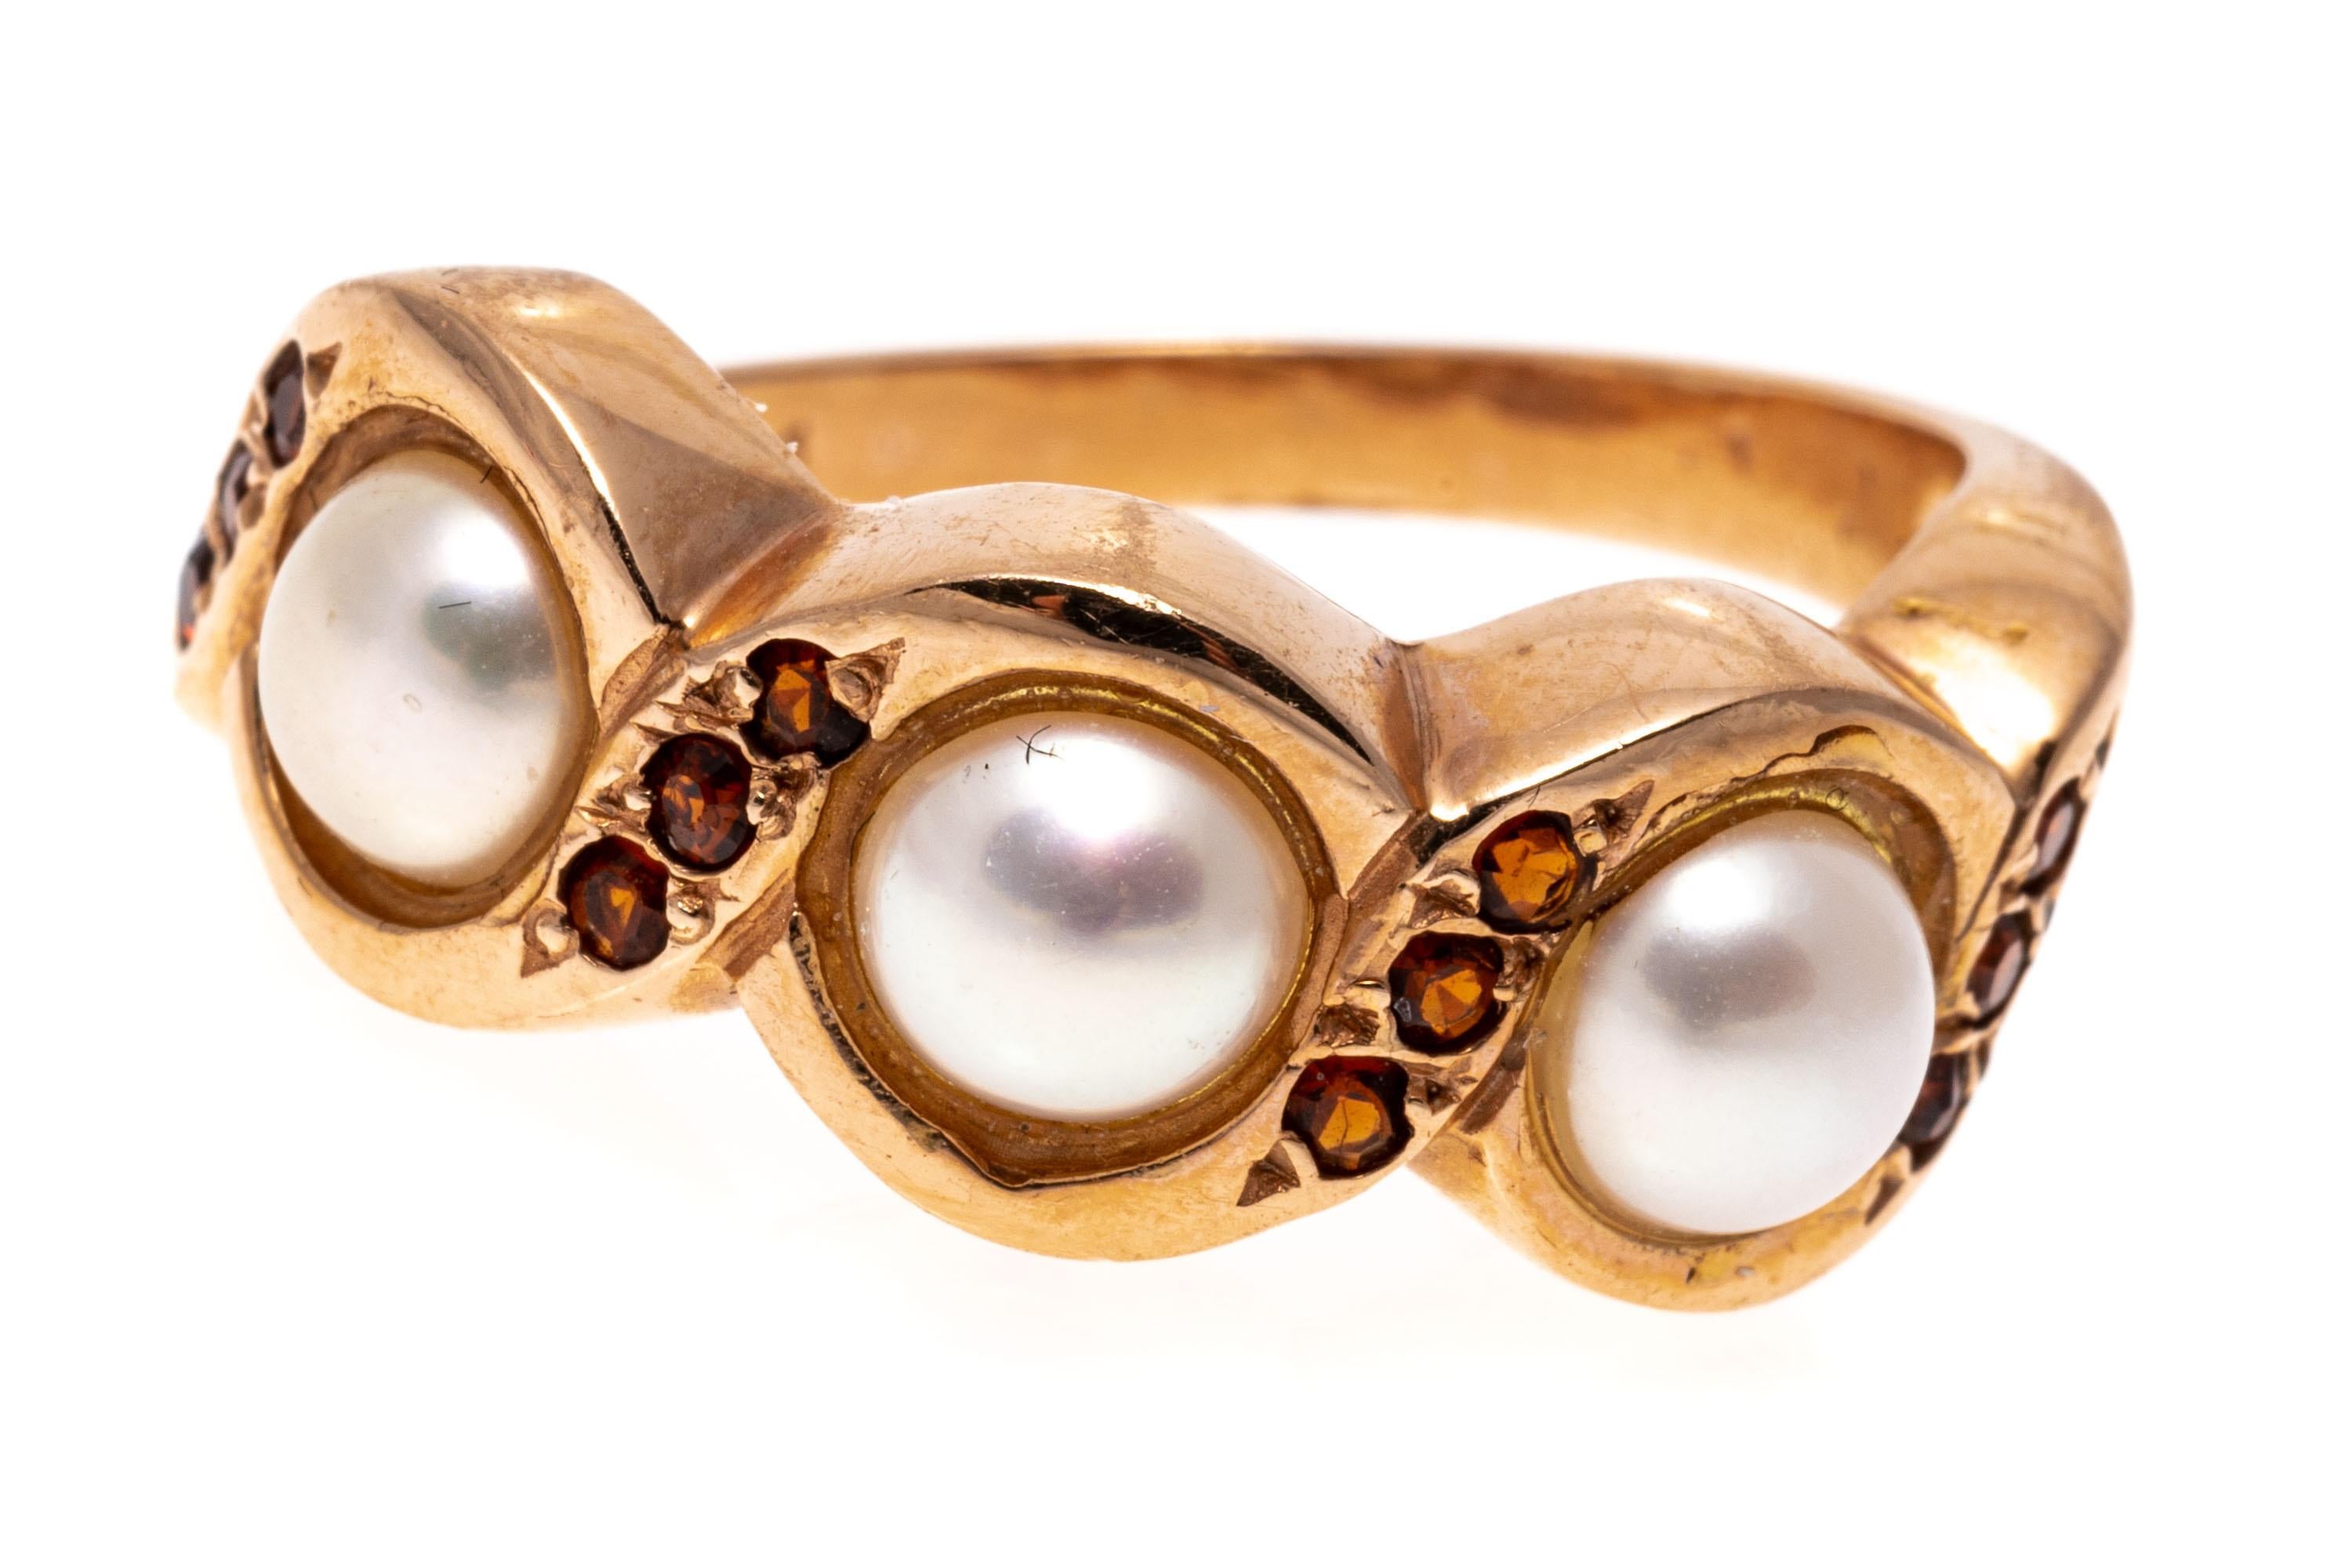 14K rose gold ring. This lovely ring is a swirling band set with three white cultured freshwater pearls, decorated with round faceted, accent garnets, approximately 0.12 TCW.
Marks: 14K
Dimensions: 13/16